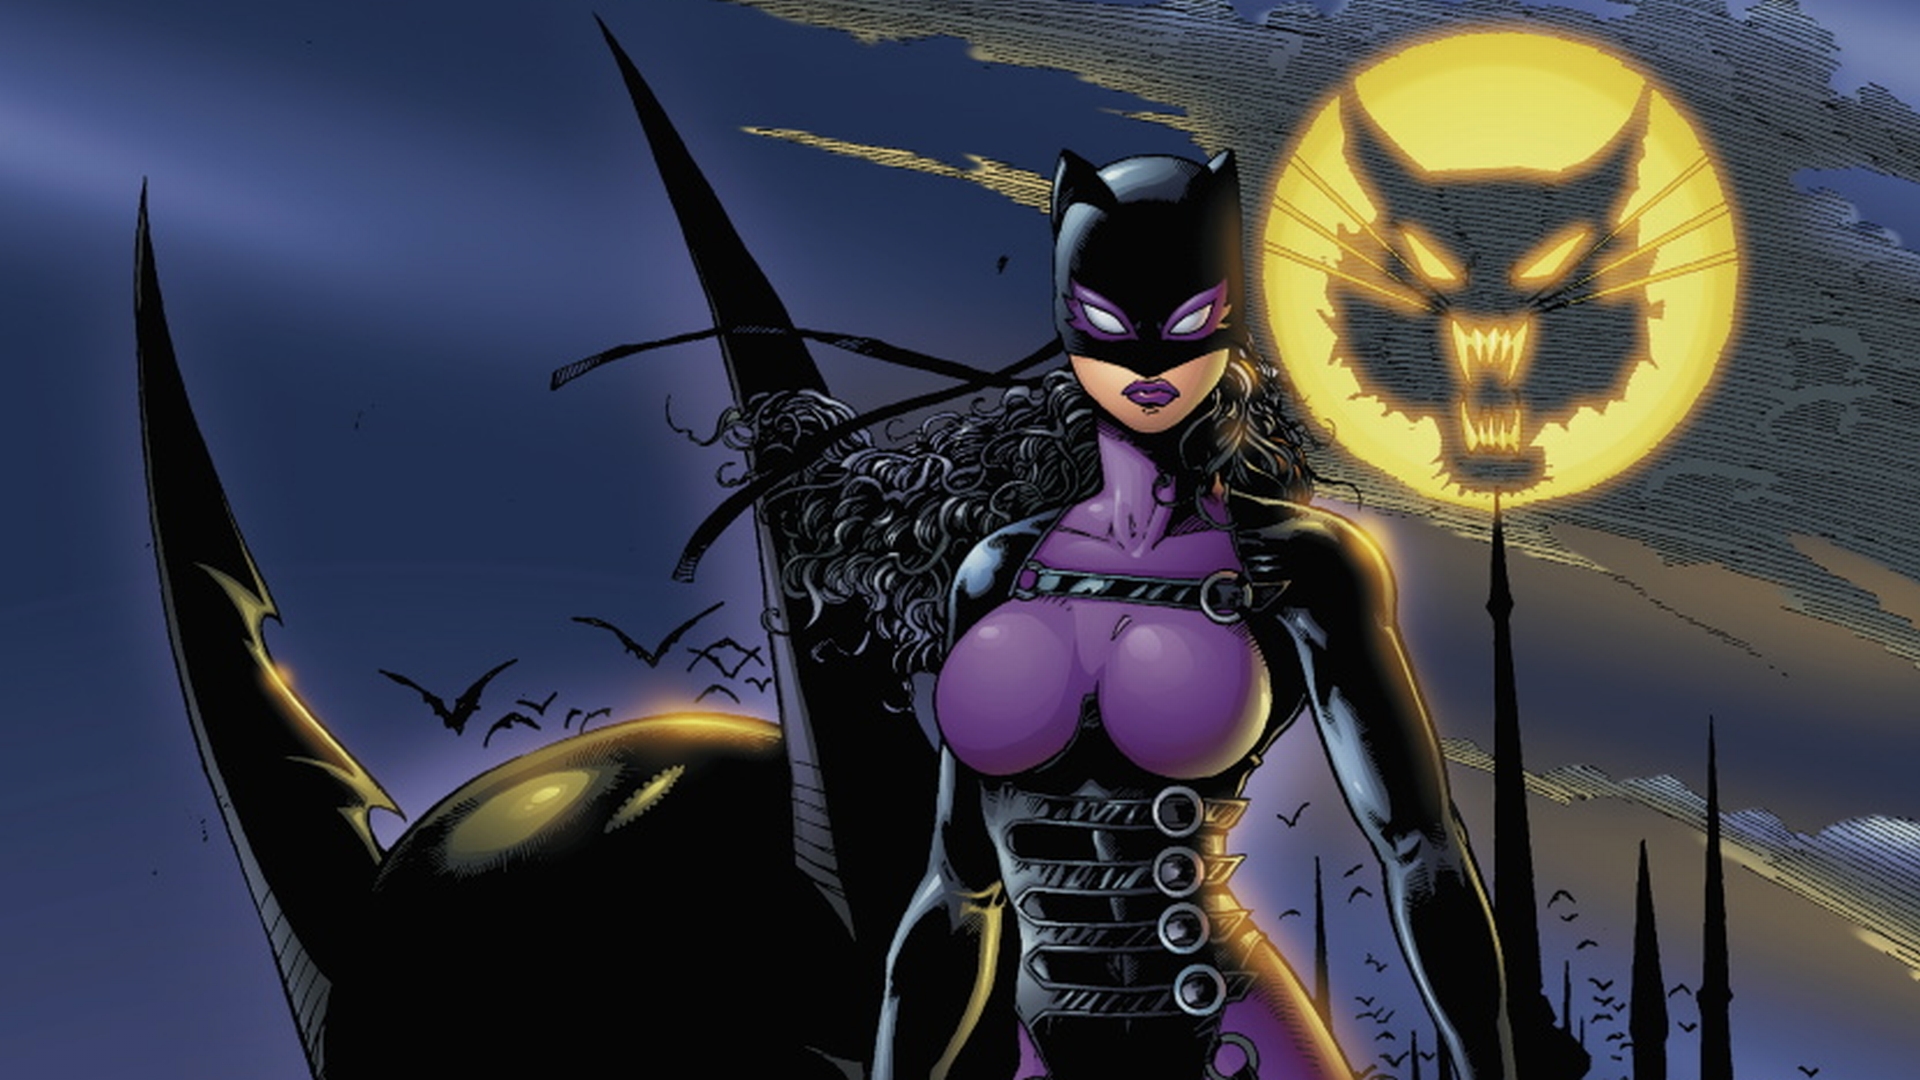 A stylish catwoman in a comic-themed desktop wallpaper.